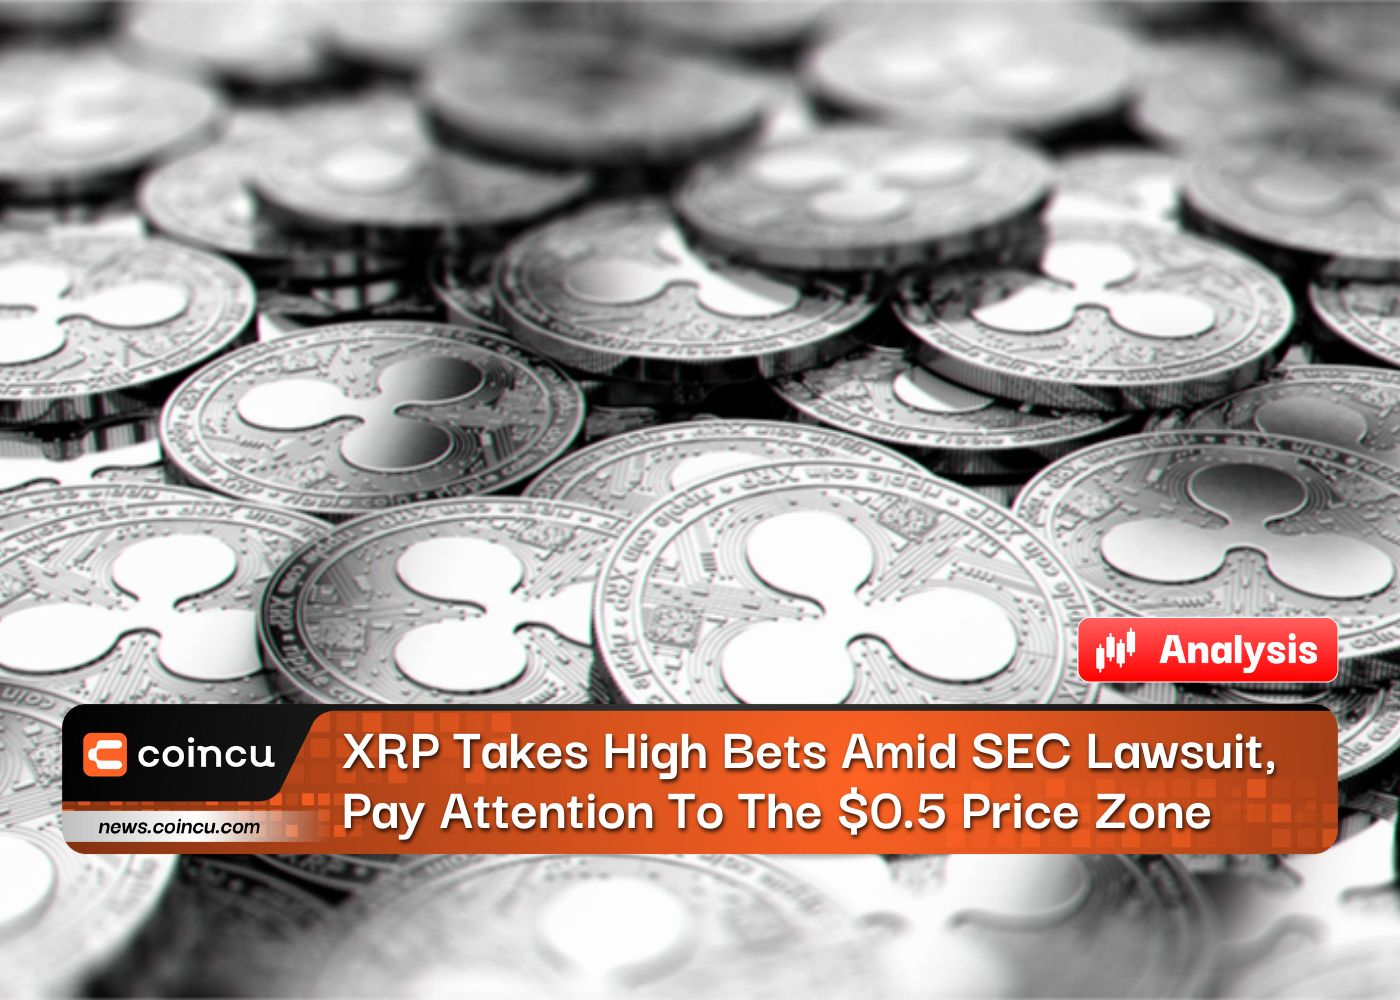 XRP Takes High Bets Amid SEC Lawsuit, Pay Attention To The $0.5 Price Zone